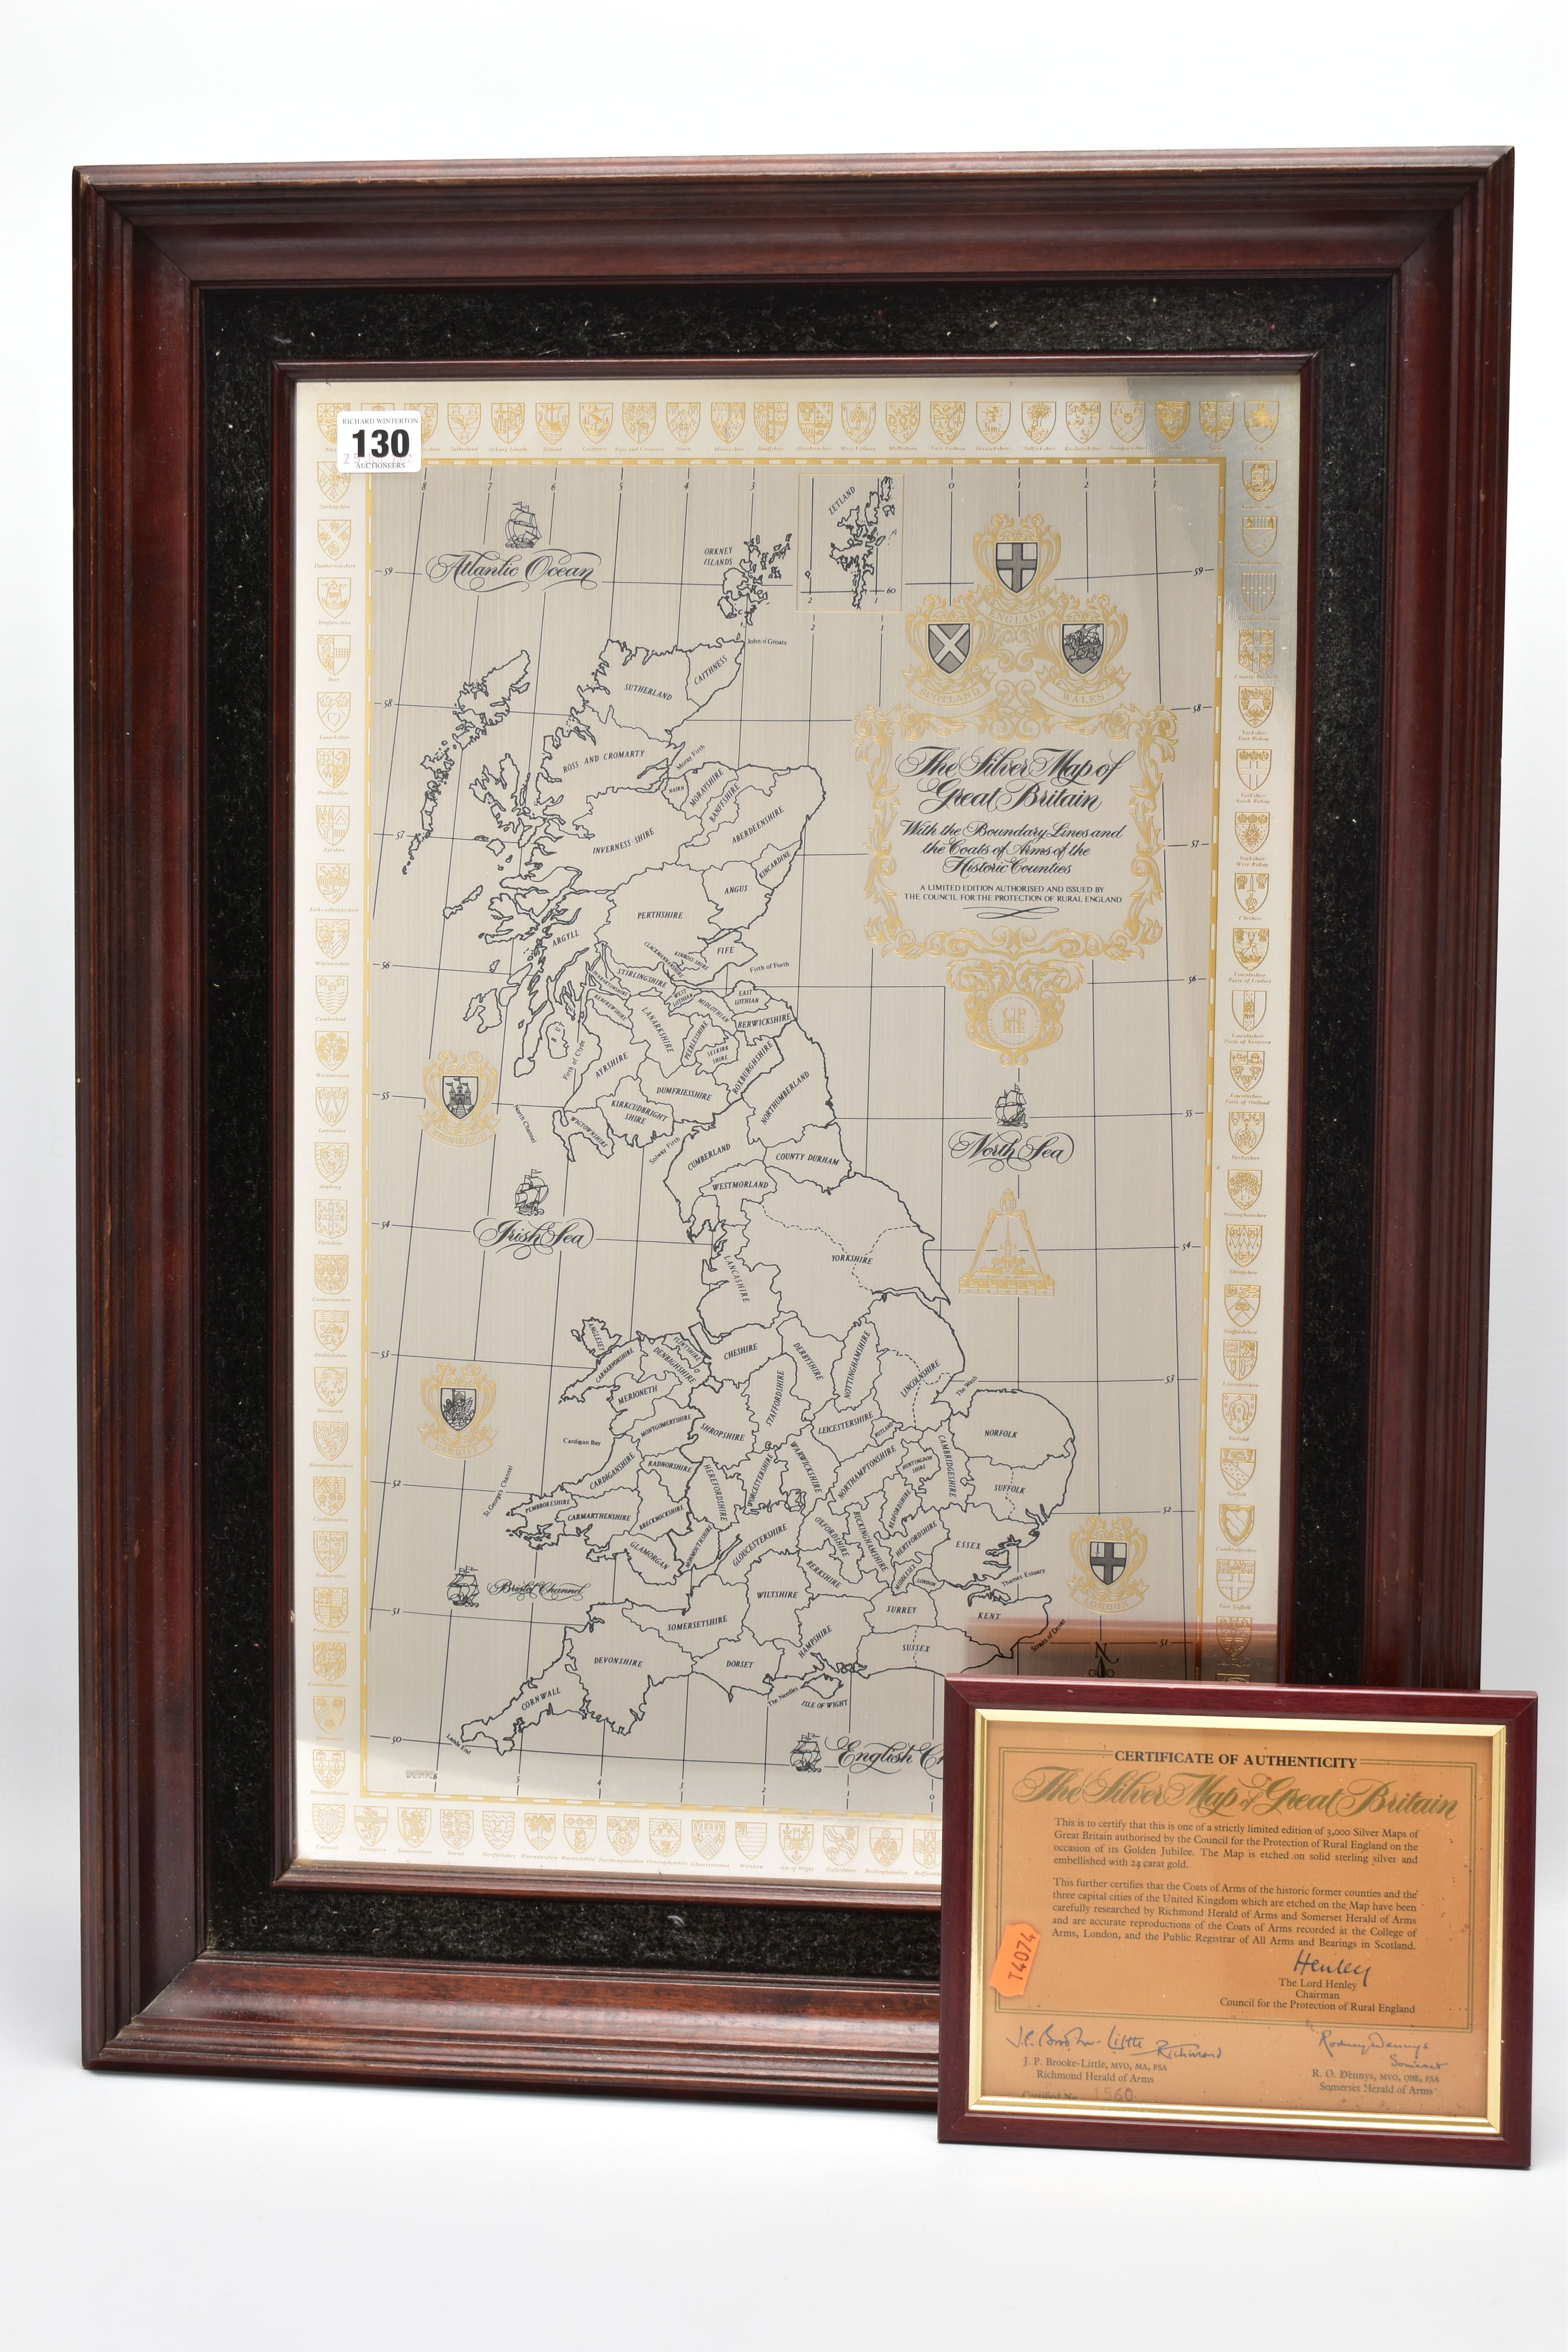 A SILVER MAP OF GREAT BRITAIN, etched with the boundary lines and coats of arms of the historic